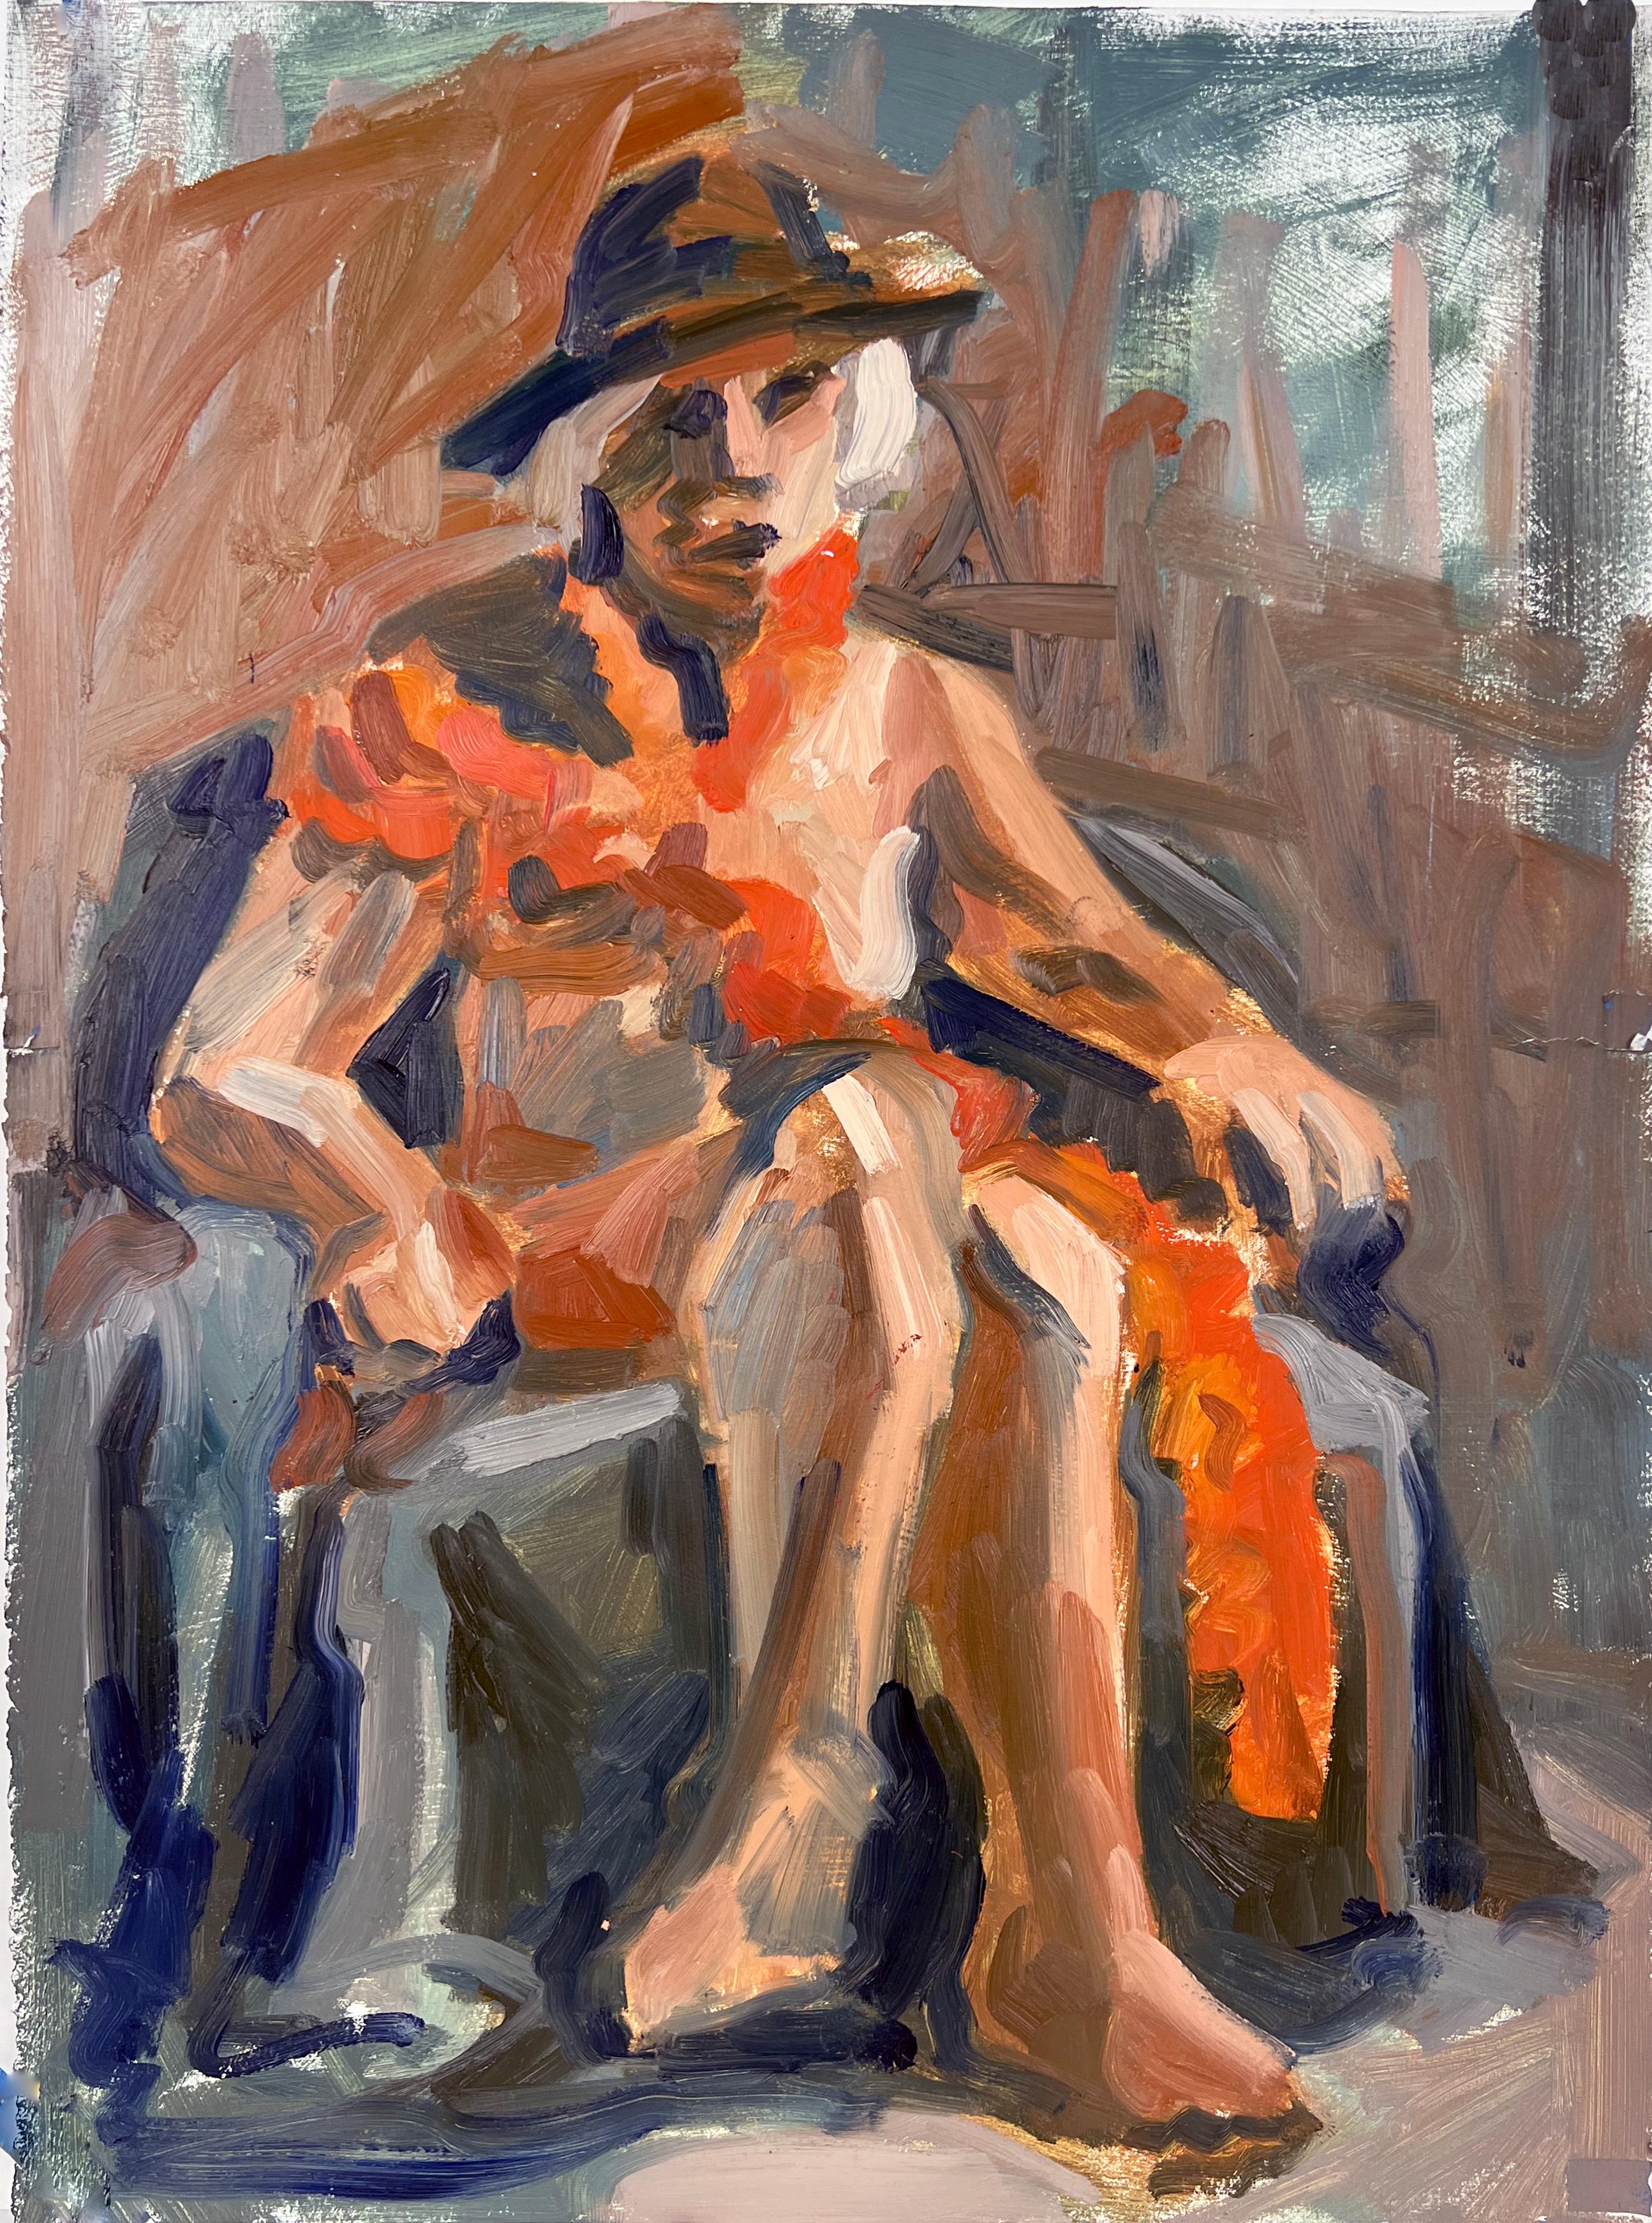 Heather Speck Figurative Painting - Seated Nude Woman Bay Area Figurative School Abstract Expressionist